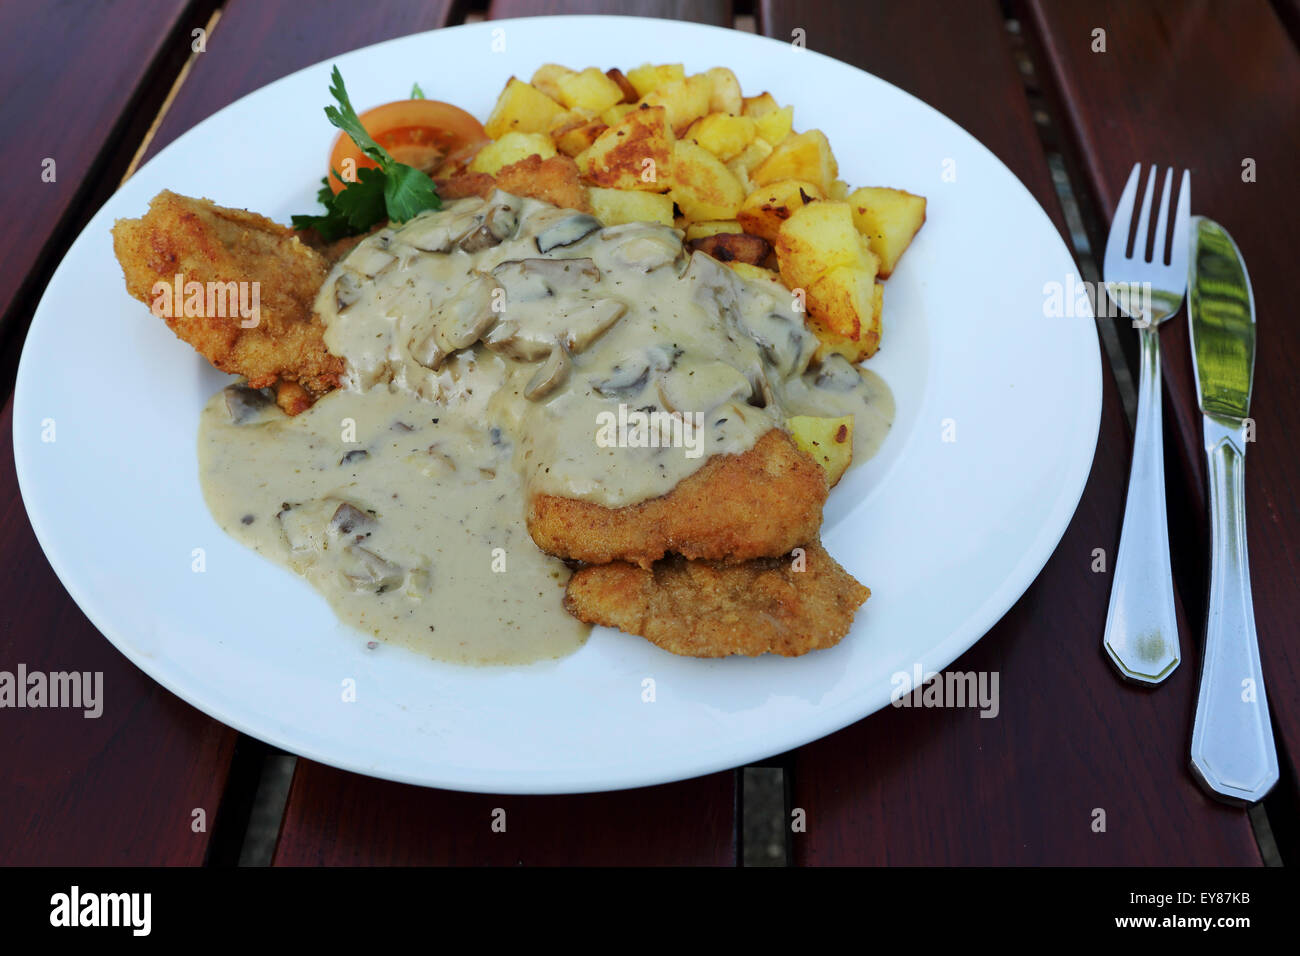 Mushroom sauce on a schnitzel served in Bad Homburg, Germany. The dish has a portion of Bratkertoffeln (fried potatoes). Stock Photo